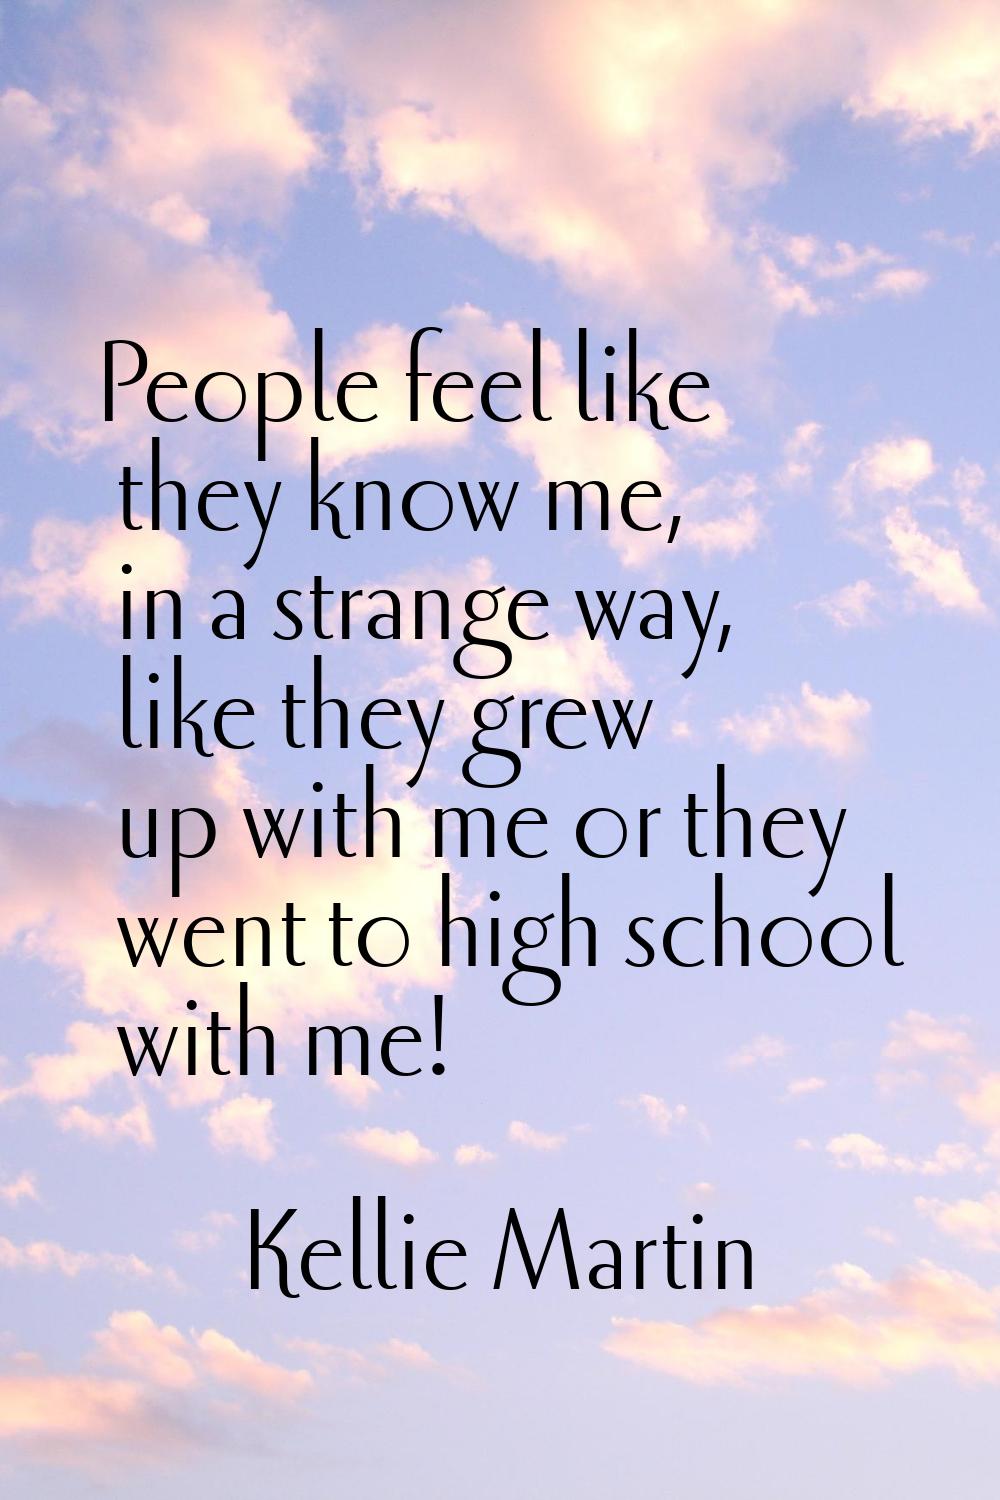 People feel like they know me, in a strange way, like they grew up with me or they went to high sch